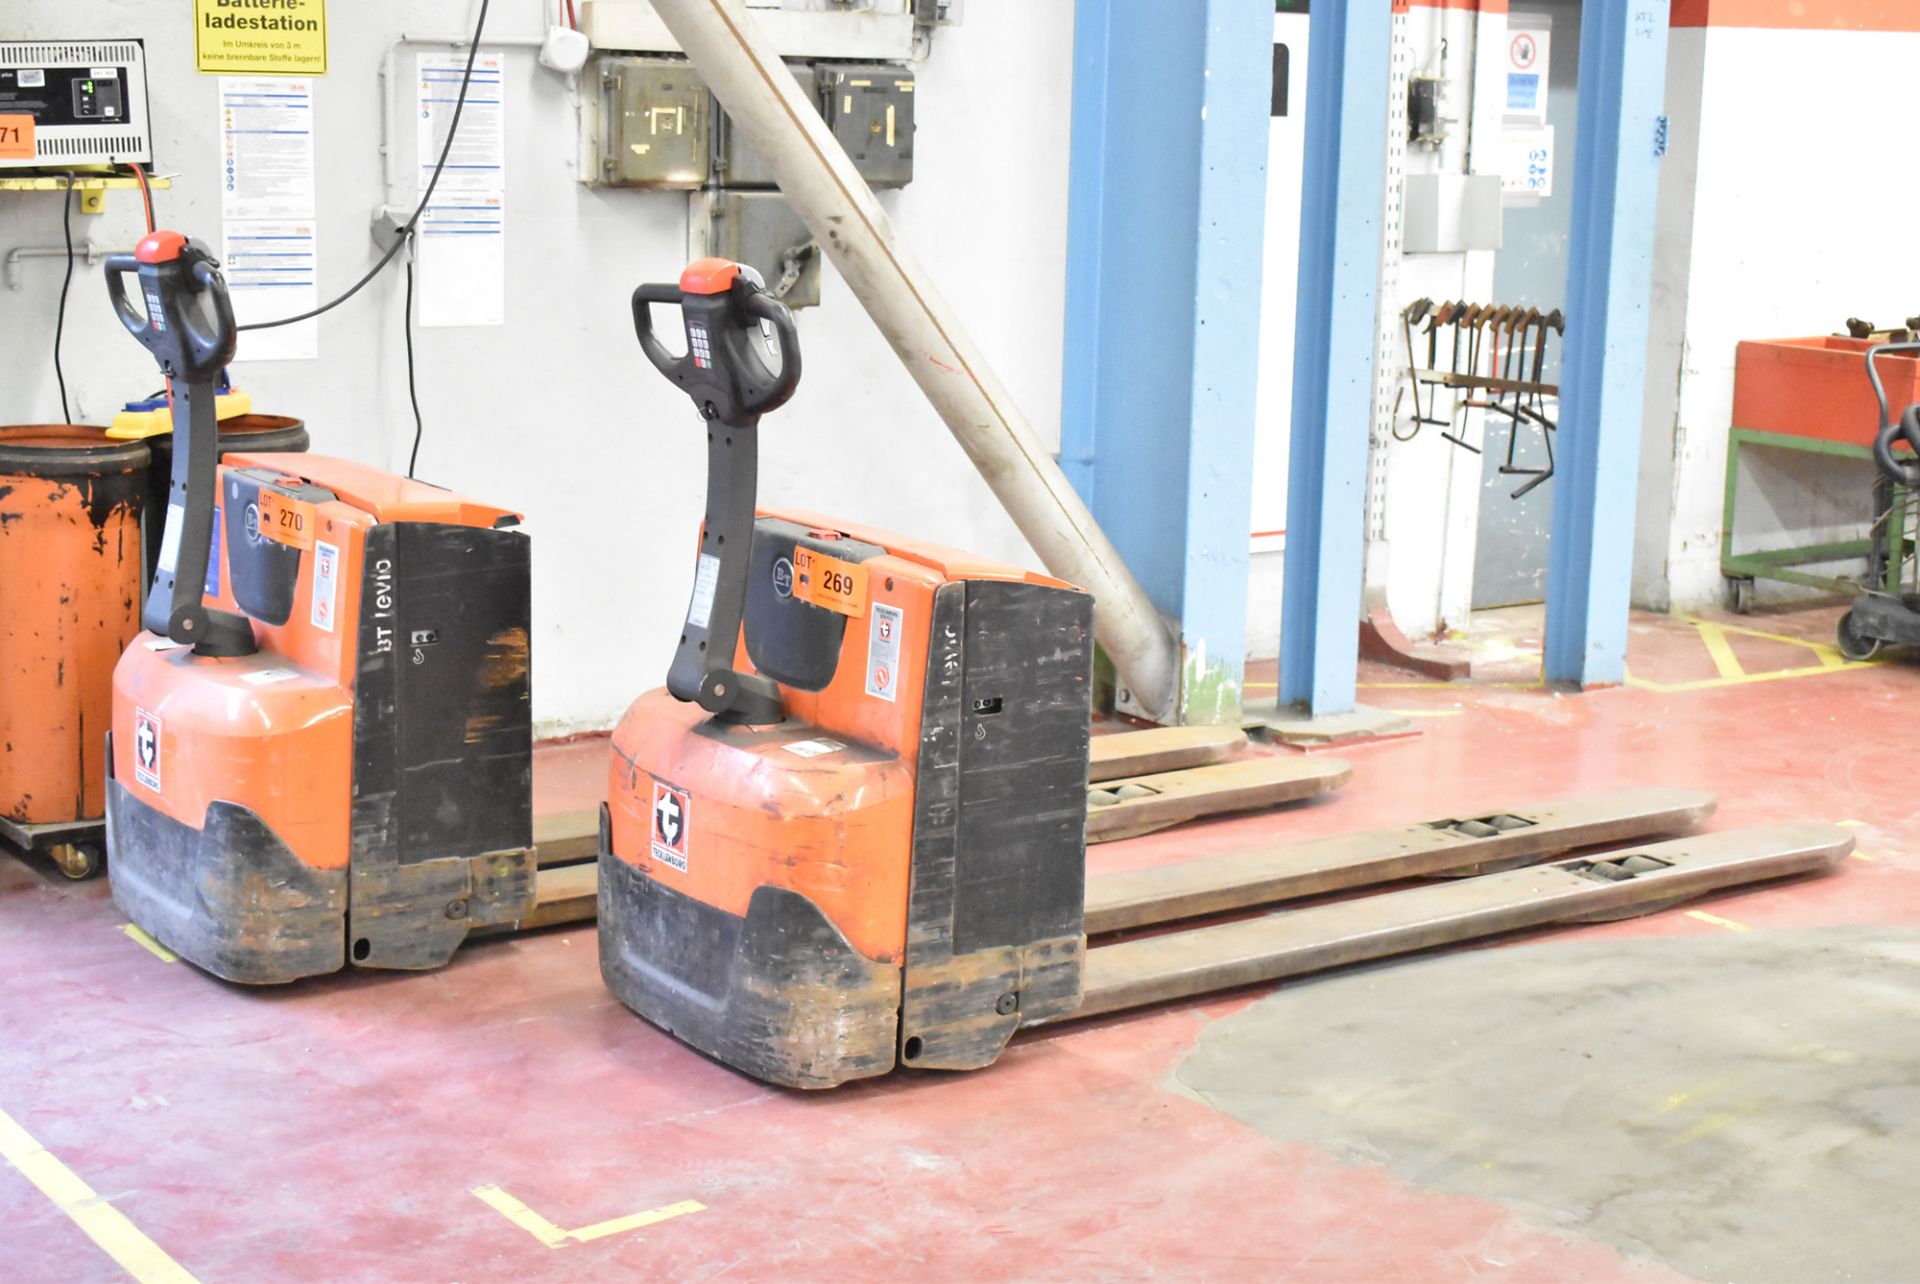 BT (2012) LWE200 ELECTRIC PALLET TRUCK WITH 2000 KG CAPACITY, EXTRA LONG FORKS, 24 V BATTERY, S/N